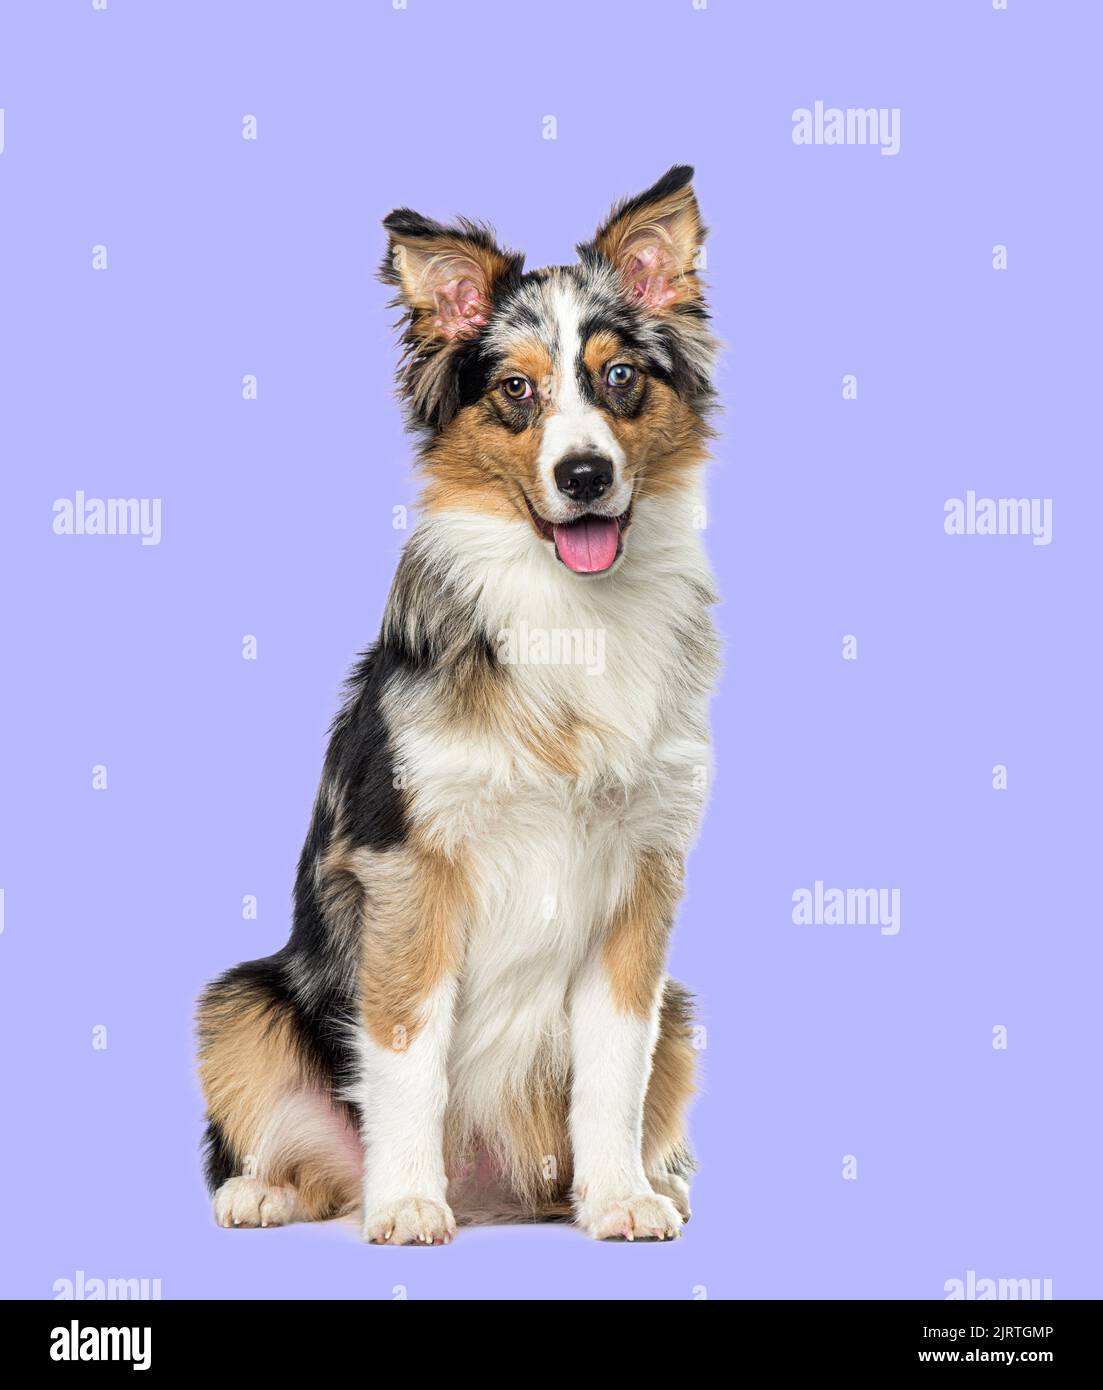 Sitting and panting Blue merle border collie on a purple background Stock Photo